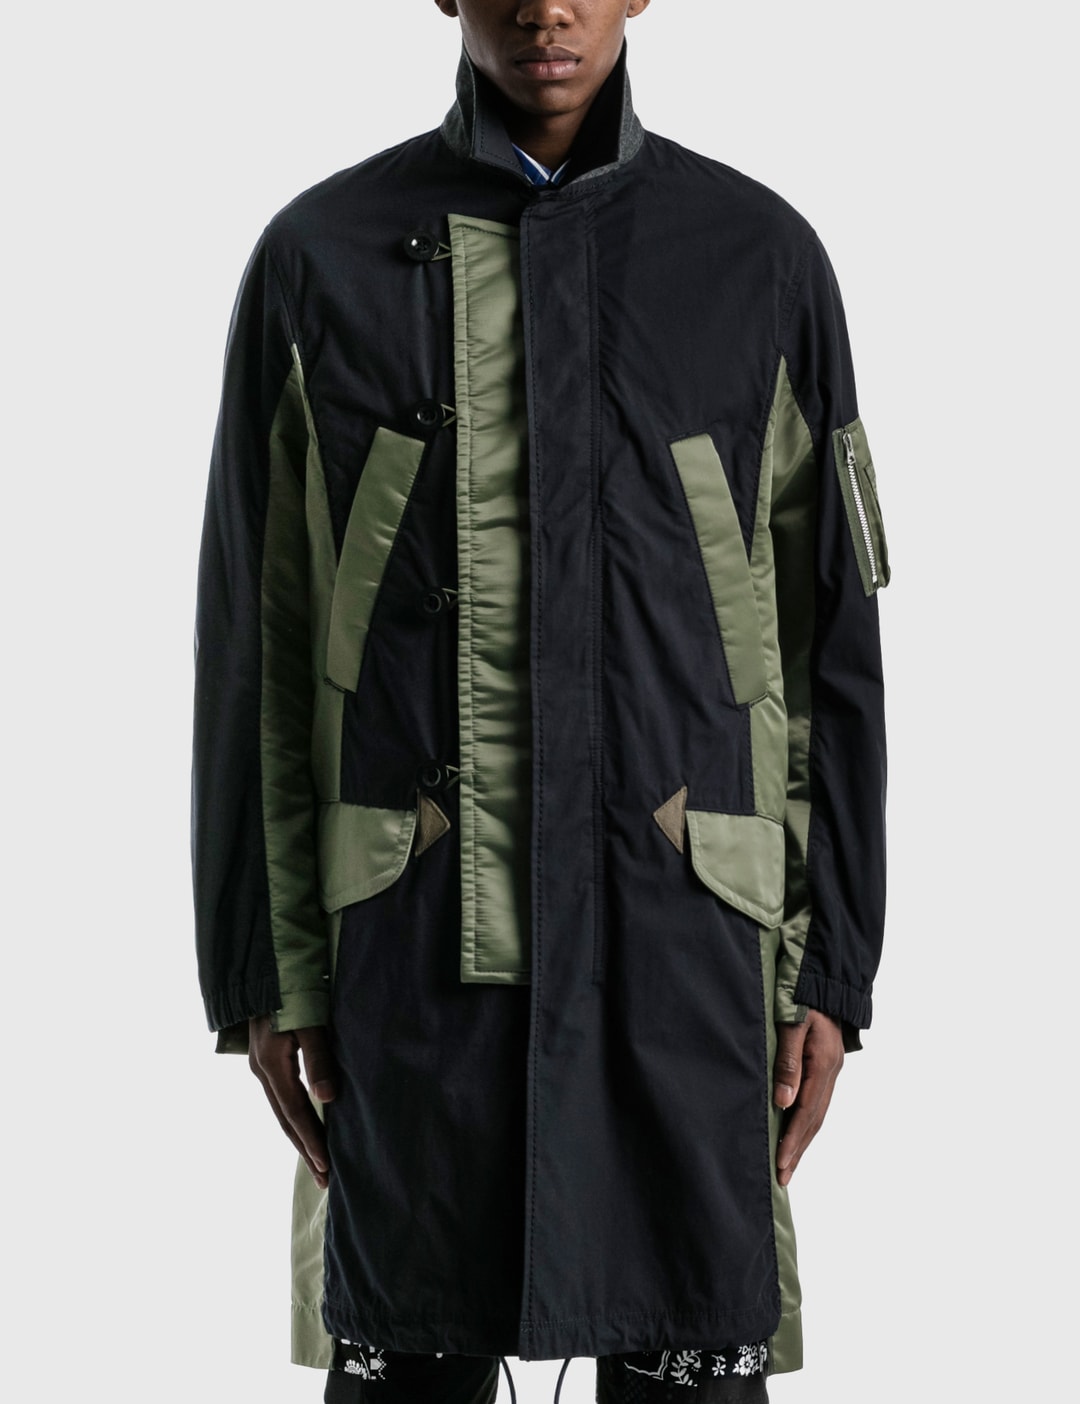 Sacai - Military Coat | HBX - Globally Curated Fashion and Lifestyle by ...